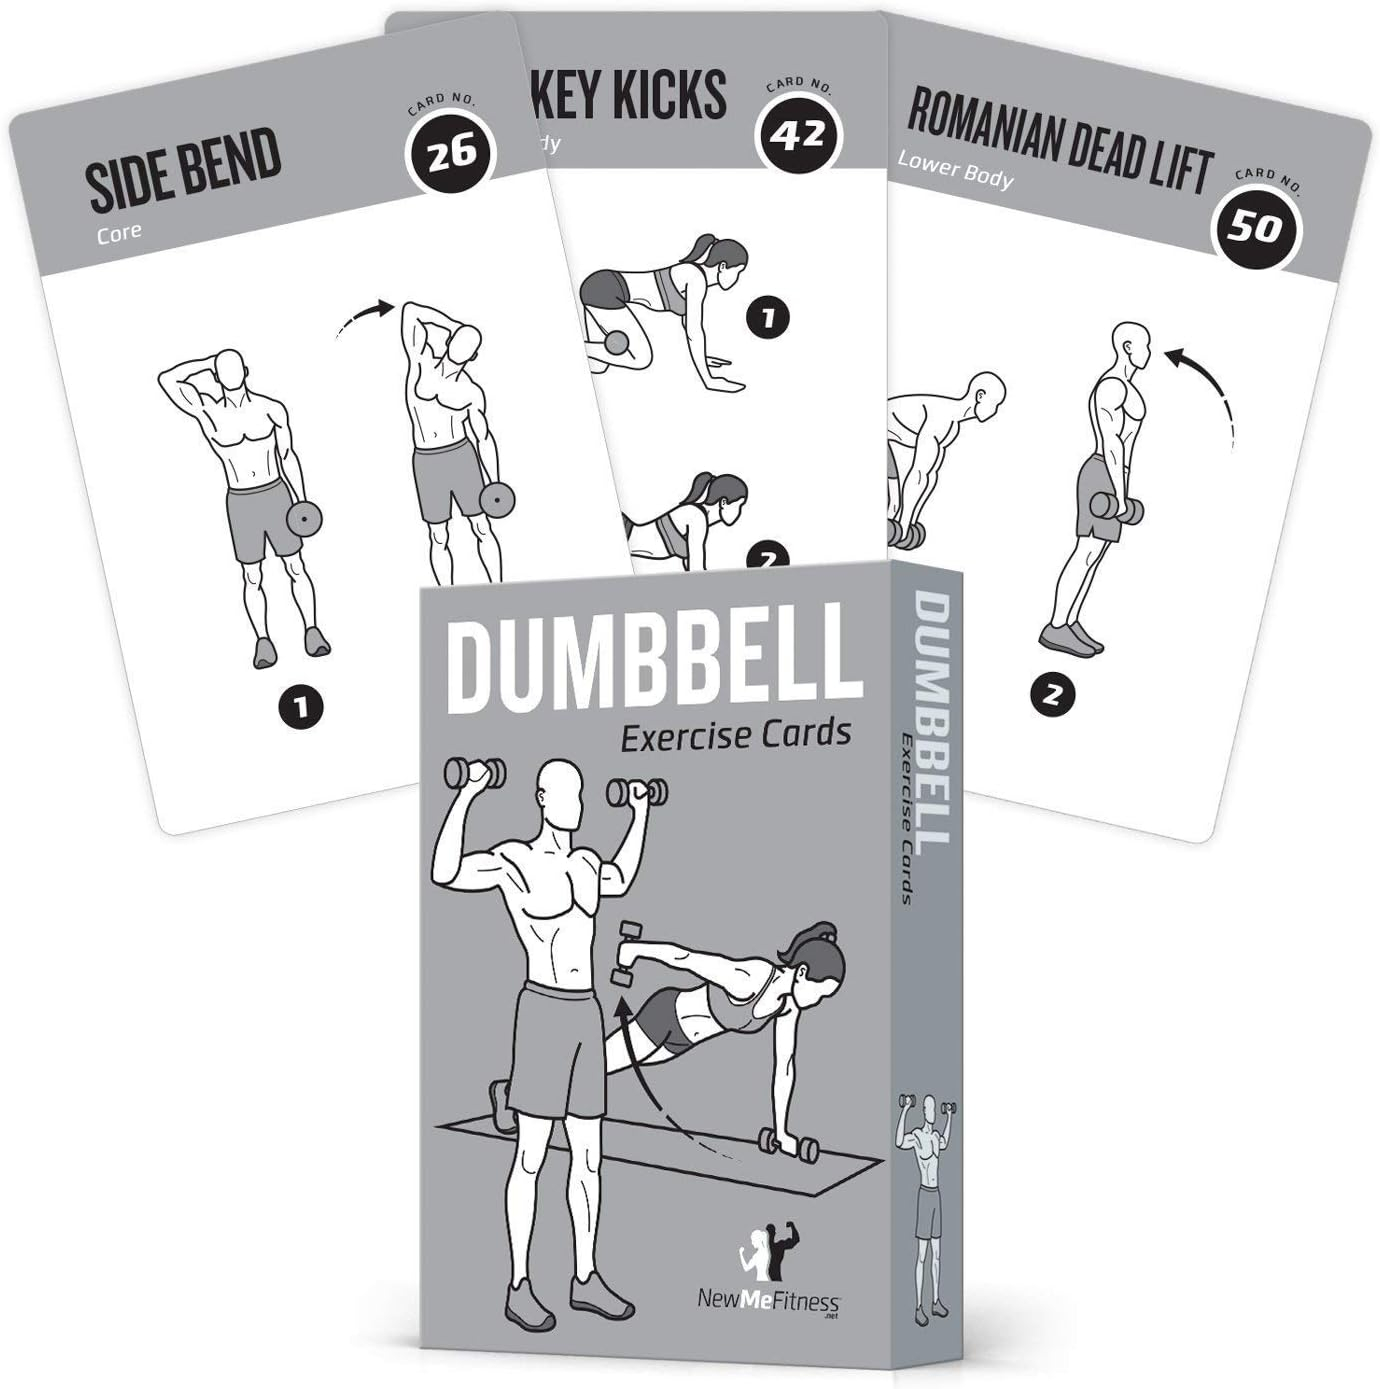 NewMe Fitness Dumbbell Workout Cards, Instructional Fitness Deck for Women  Men, Beginner Fitness Guide to Training Exercises at Home or Gym (Dumbbell, Vol 1)